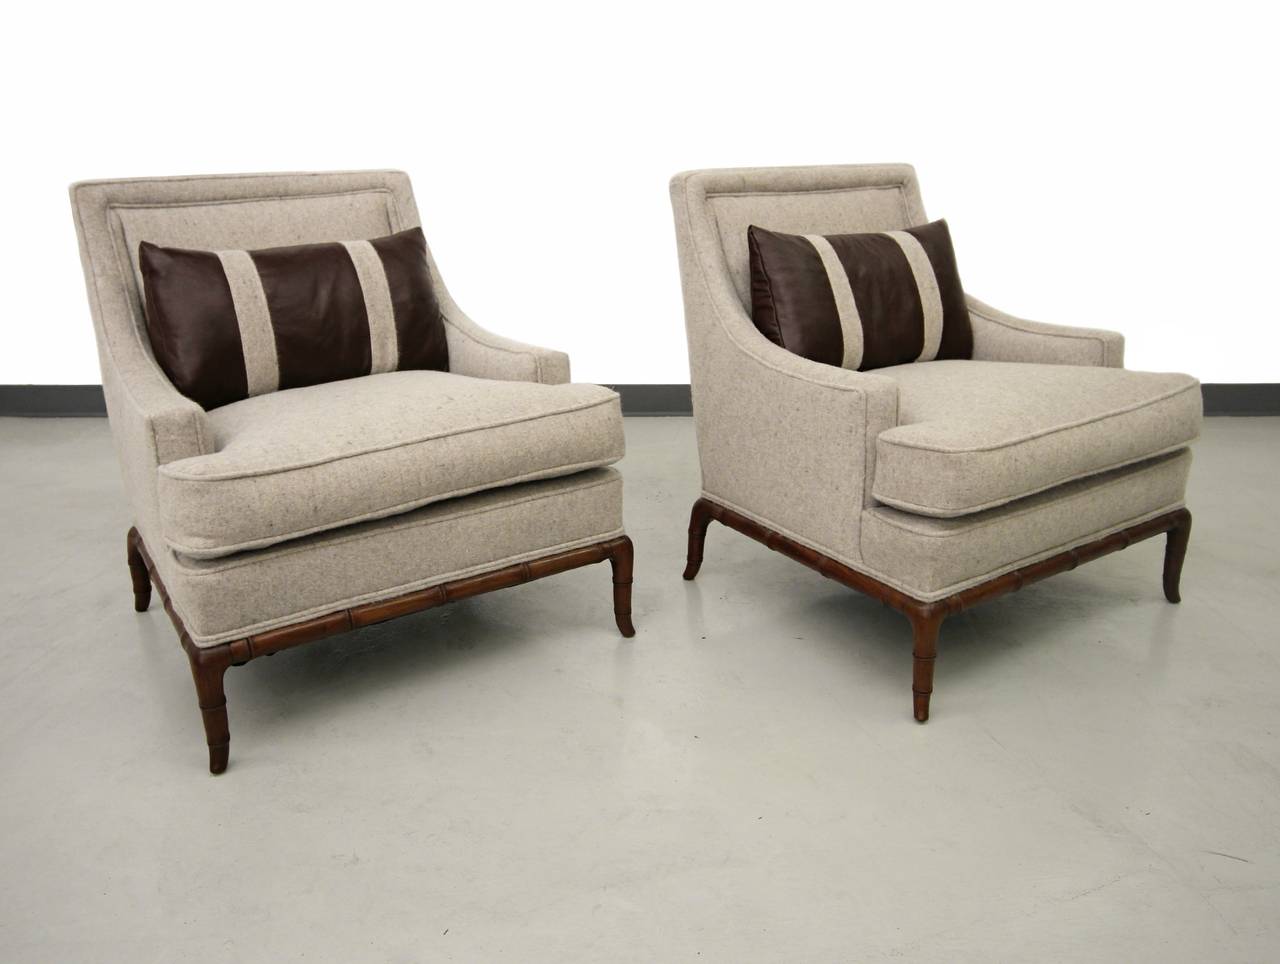 Gorgeous pair of lounge chairs with beautiful sculpted bamboo bases. Perfect, cozy and comfortable in any space. Similar in style to chairs by TH Robsjohn Gibbings for Widdicomb. Chairs have been newly upholstered.